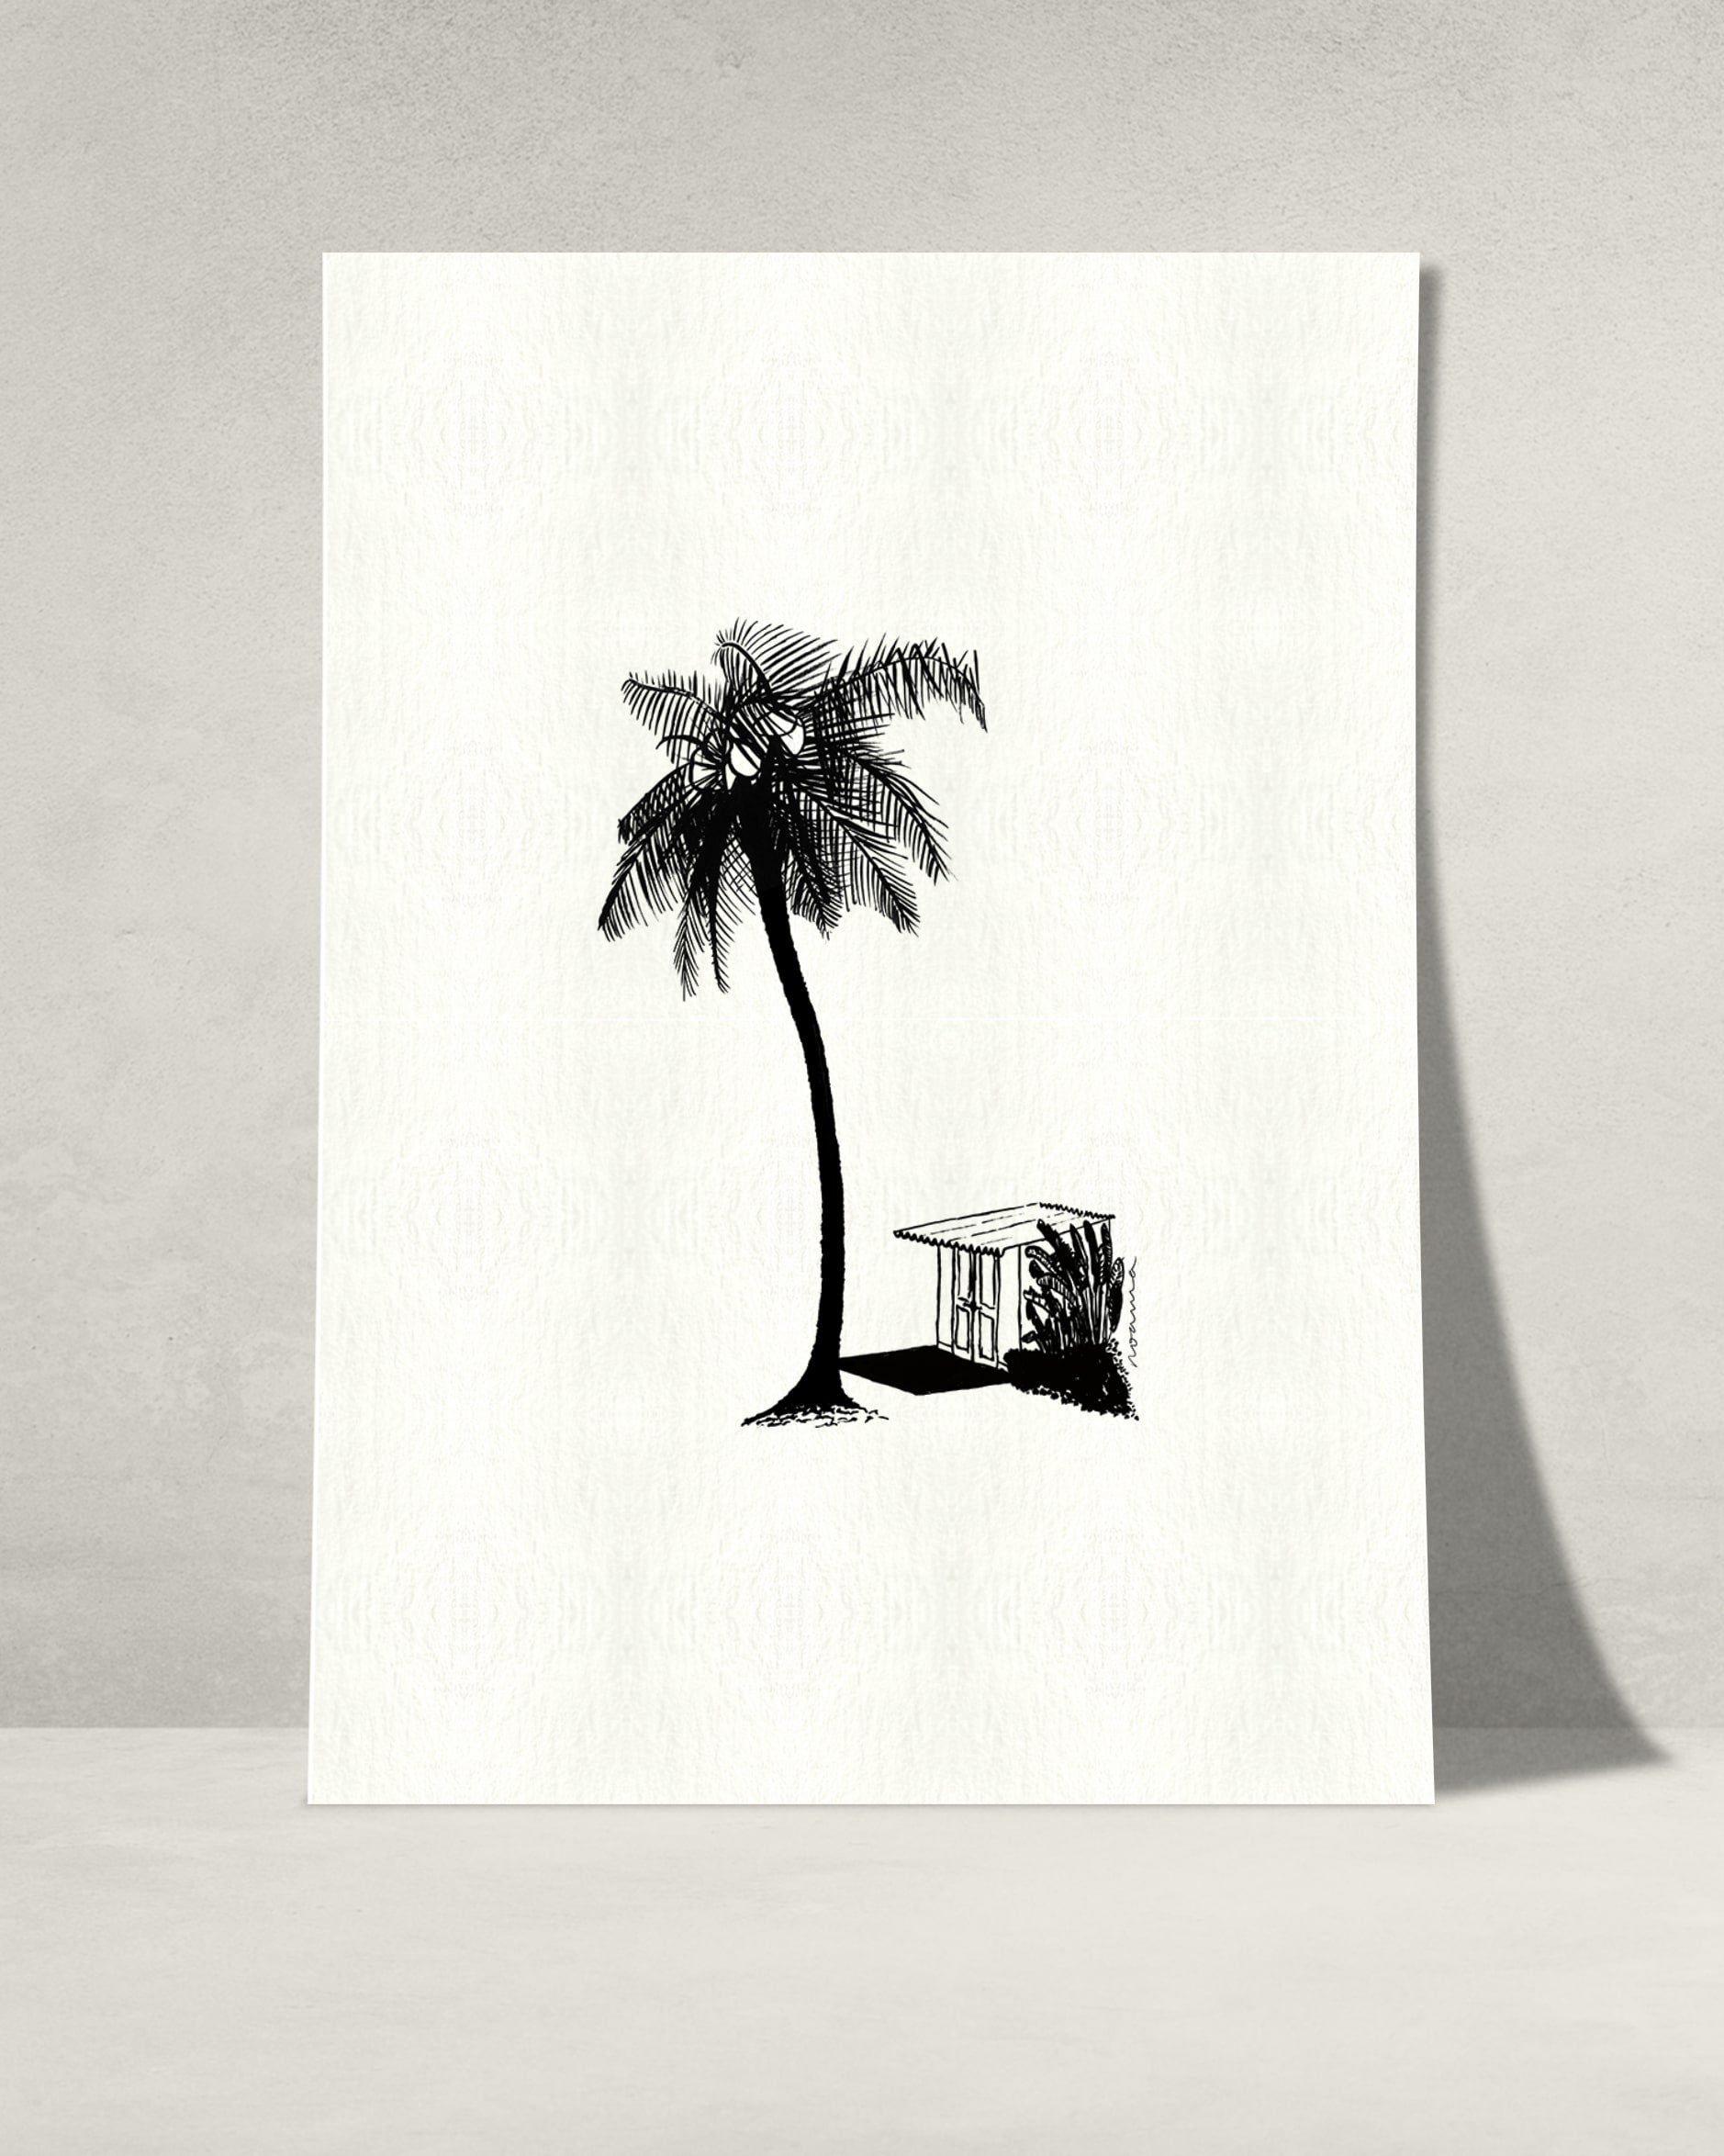 The King Coconut Tree & The Shed